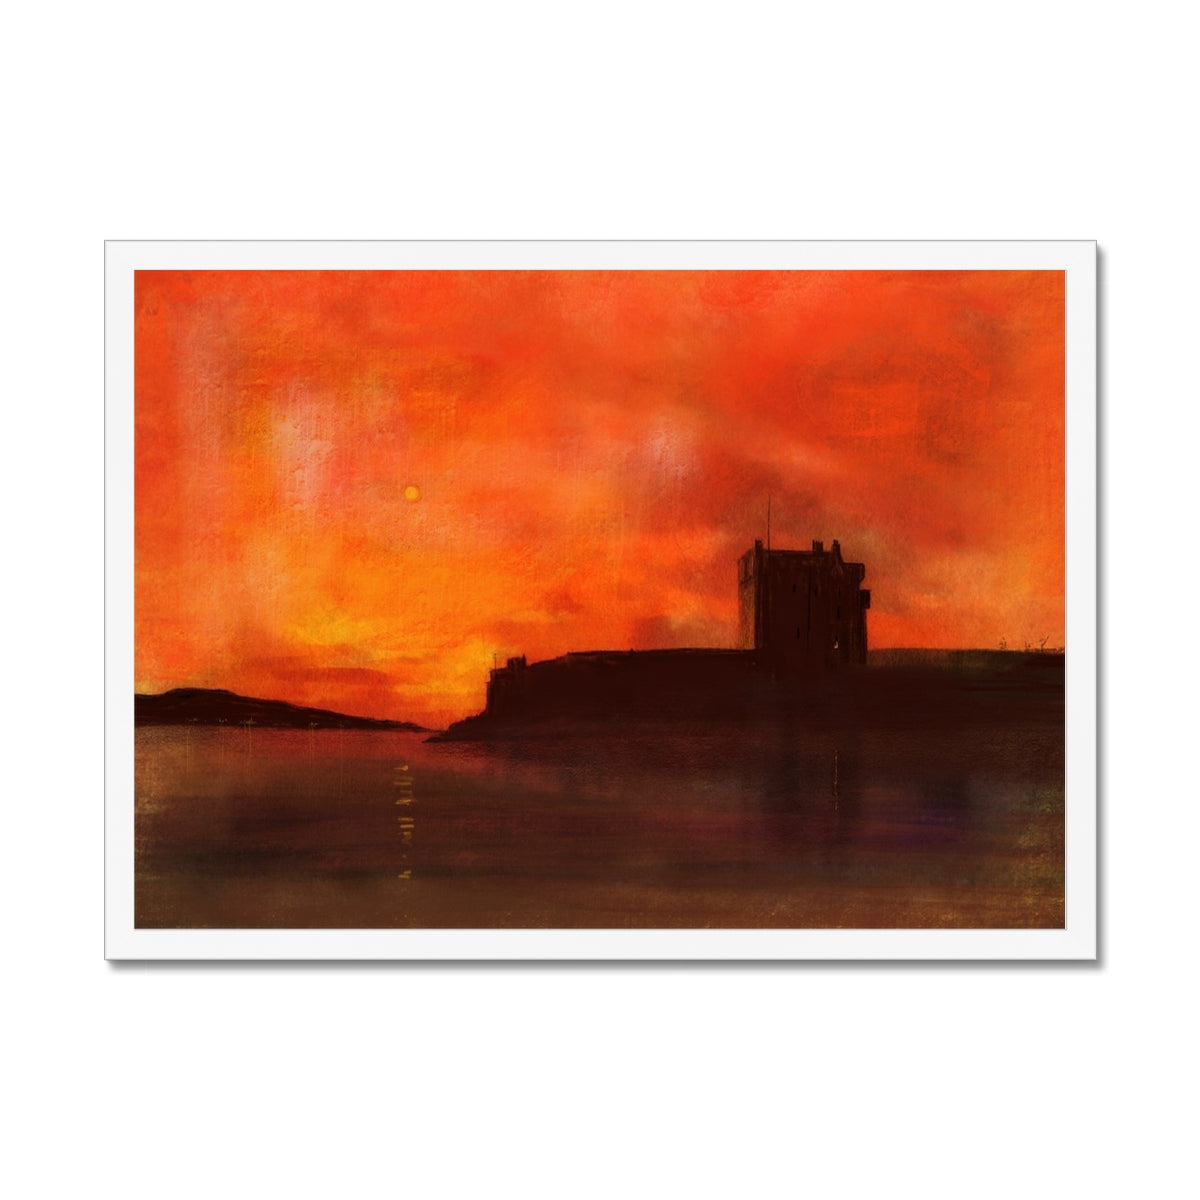 Broughty Castle Sunset Painting | Framed Prints From Scotland-Framed Prints-Historic & Iconic Scotland Art Gallery-A2 Landscape-White Frame-Paintings, Prints, Homeware, Art Gifts From Scotland By Scottish Artist Kevin Hunter